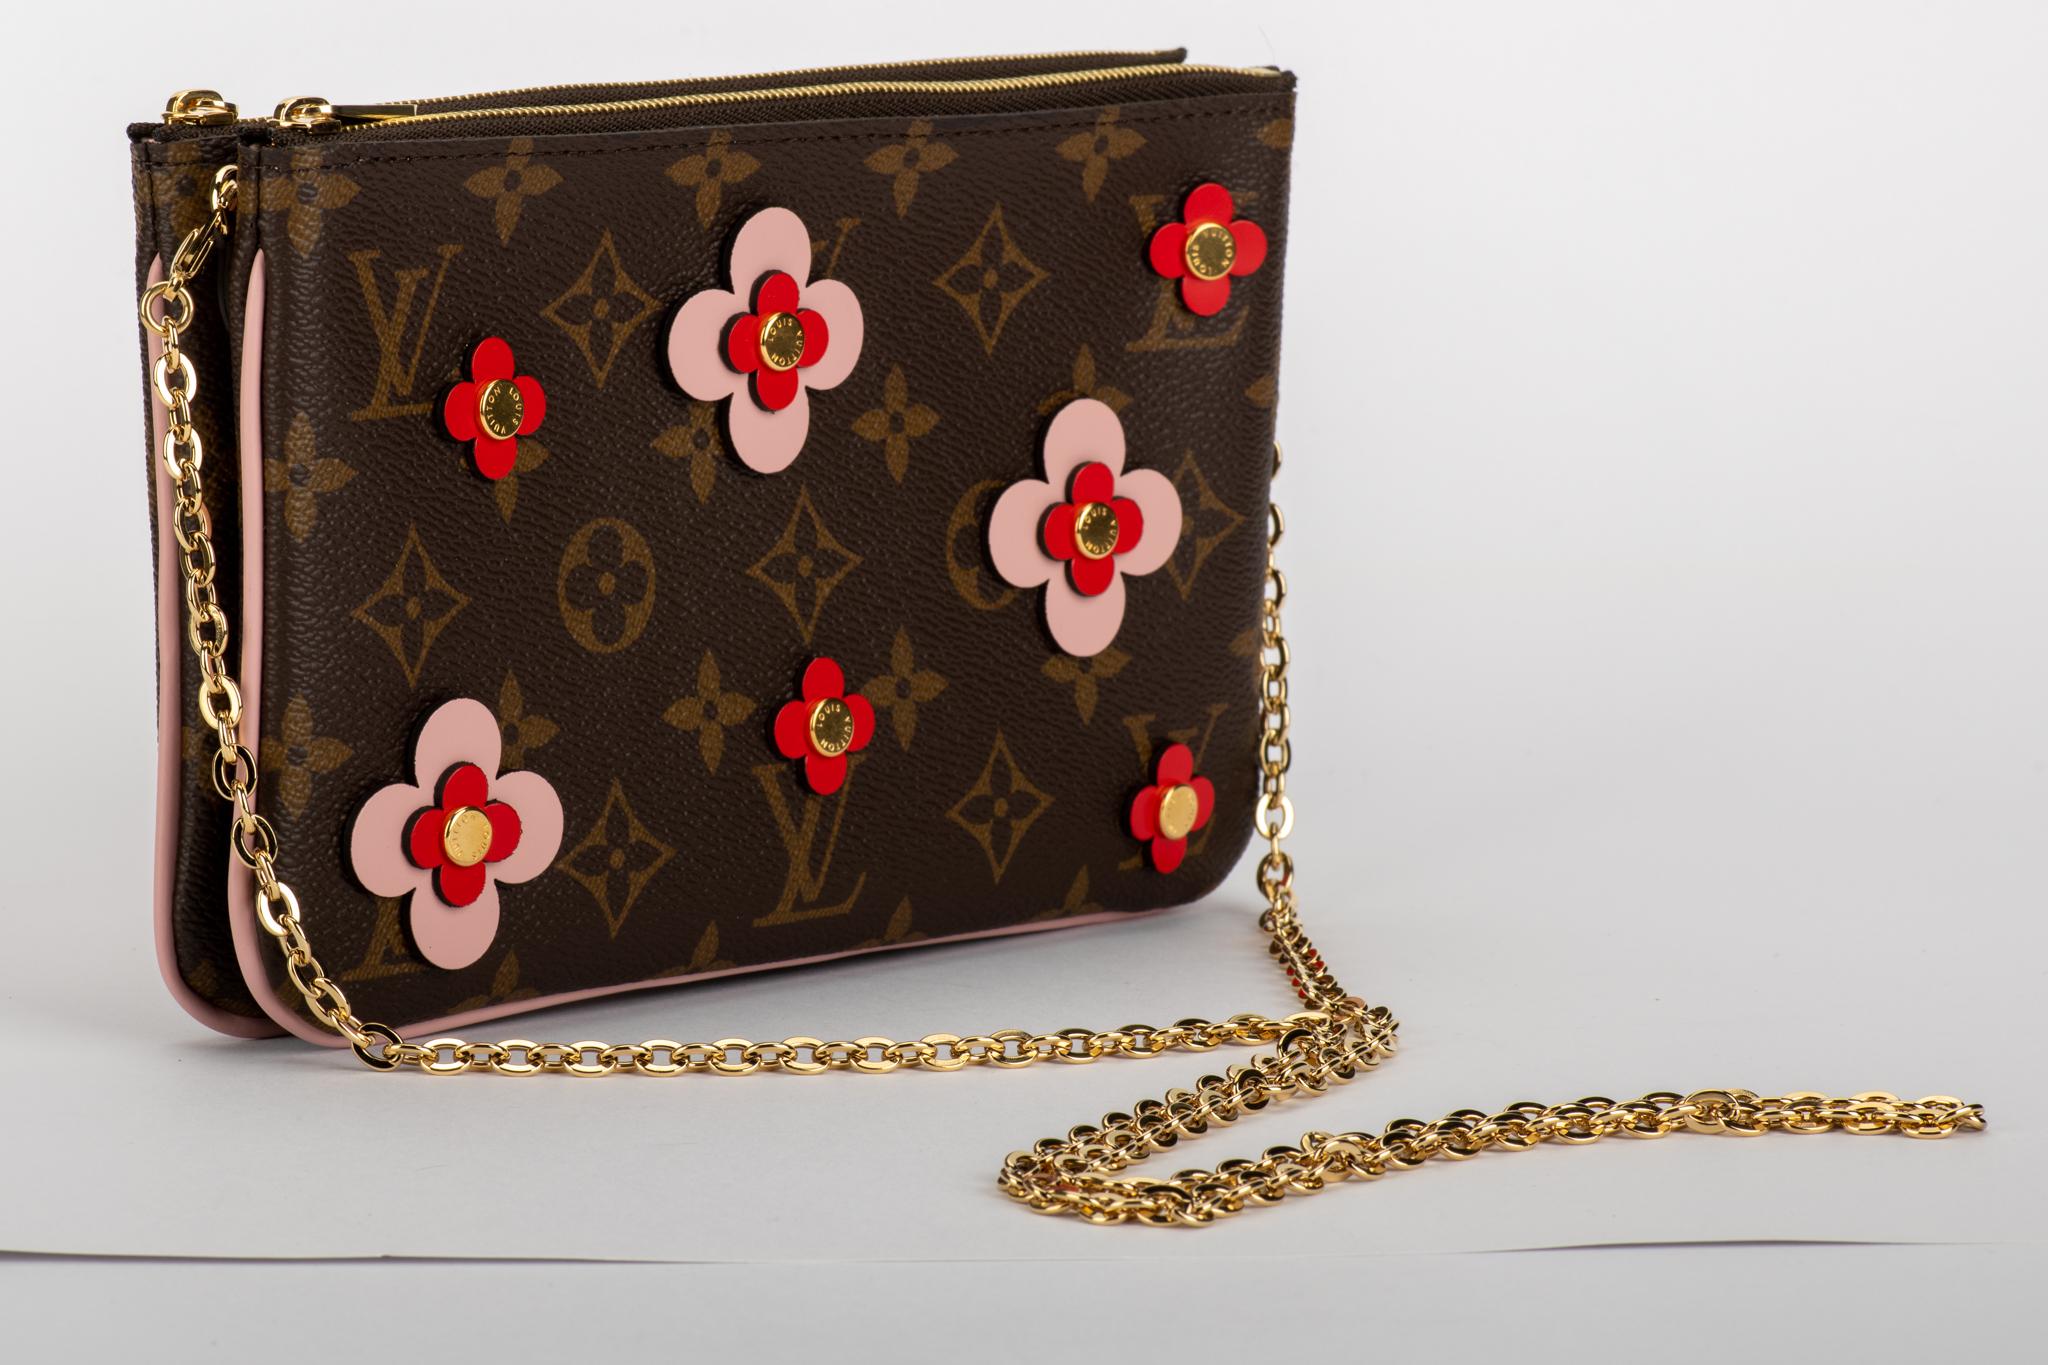 Louis Vuitton double pouchette in coated monogram canvas with pink and red flowers. Double zipped compartments with middle open pocket, can be used as a pouchette or as a crossbody. Comes with original dust cover. Never worn.